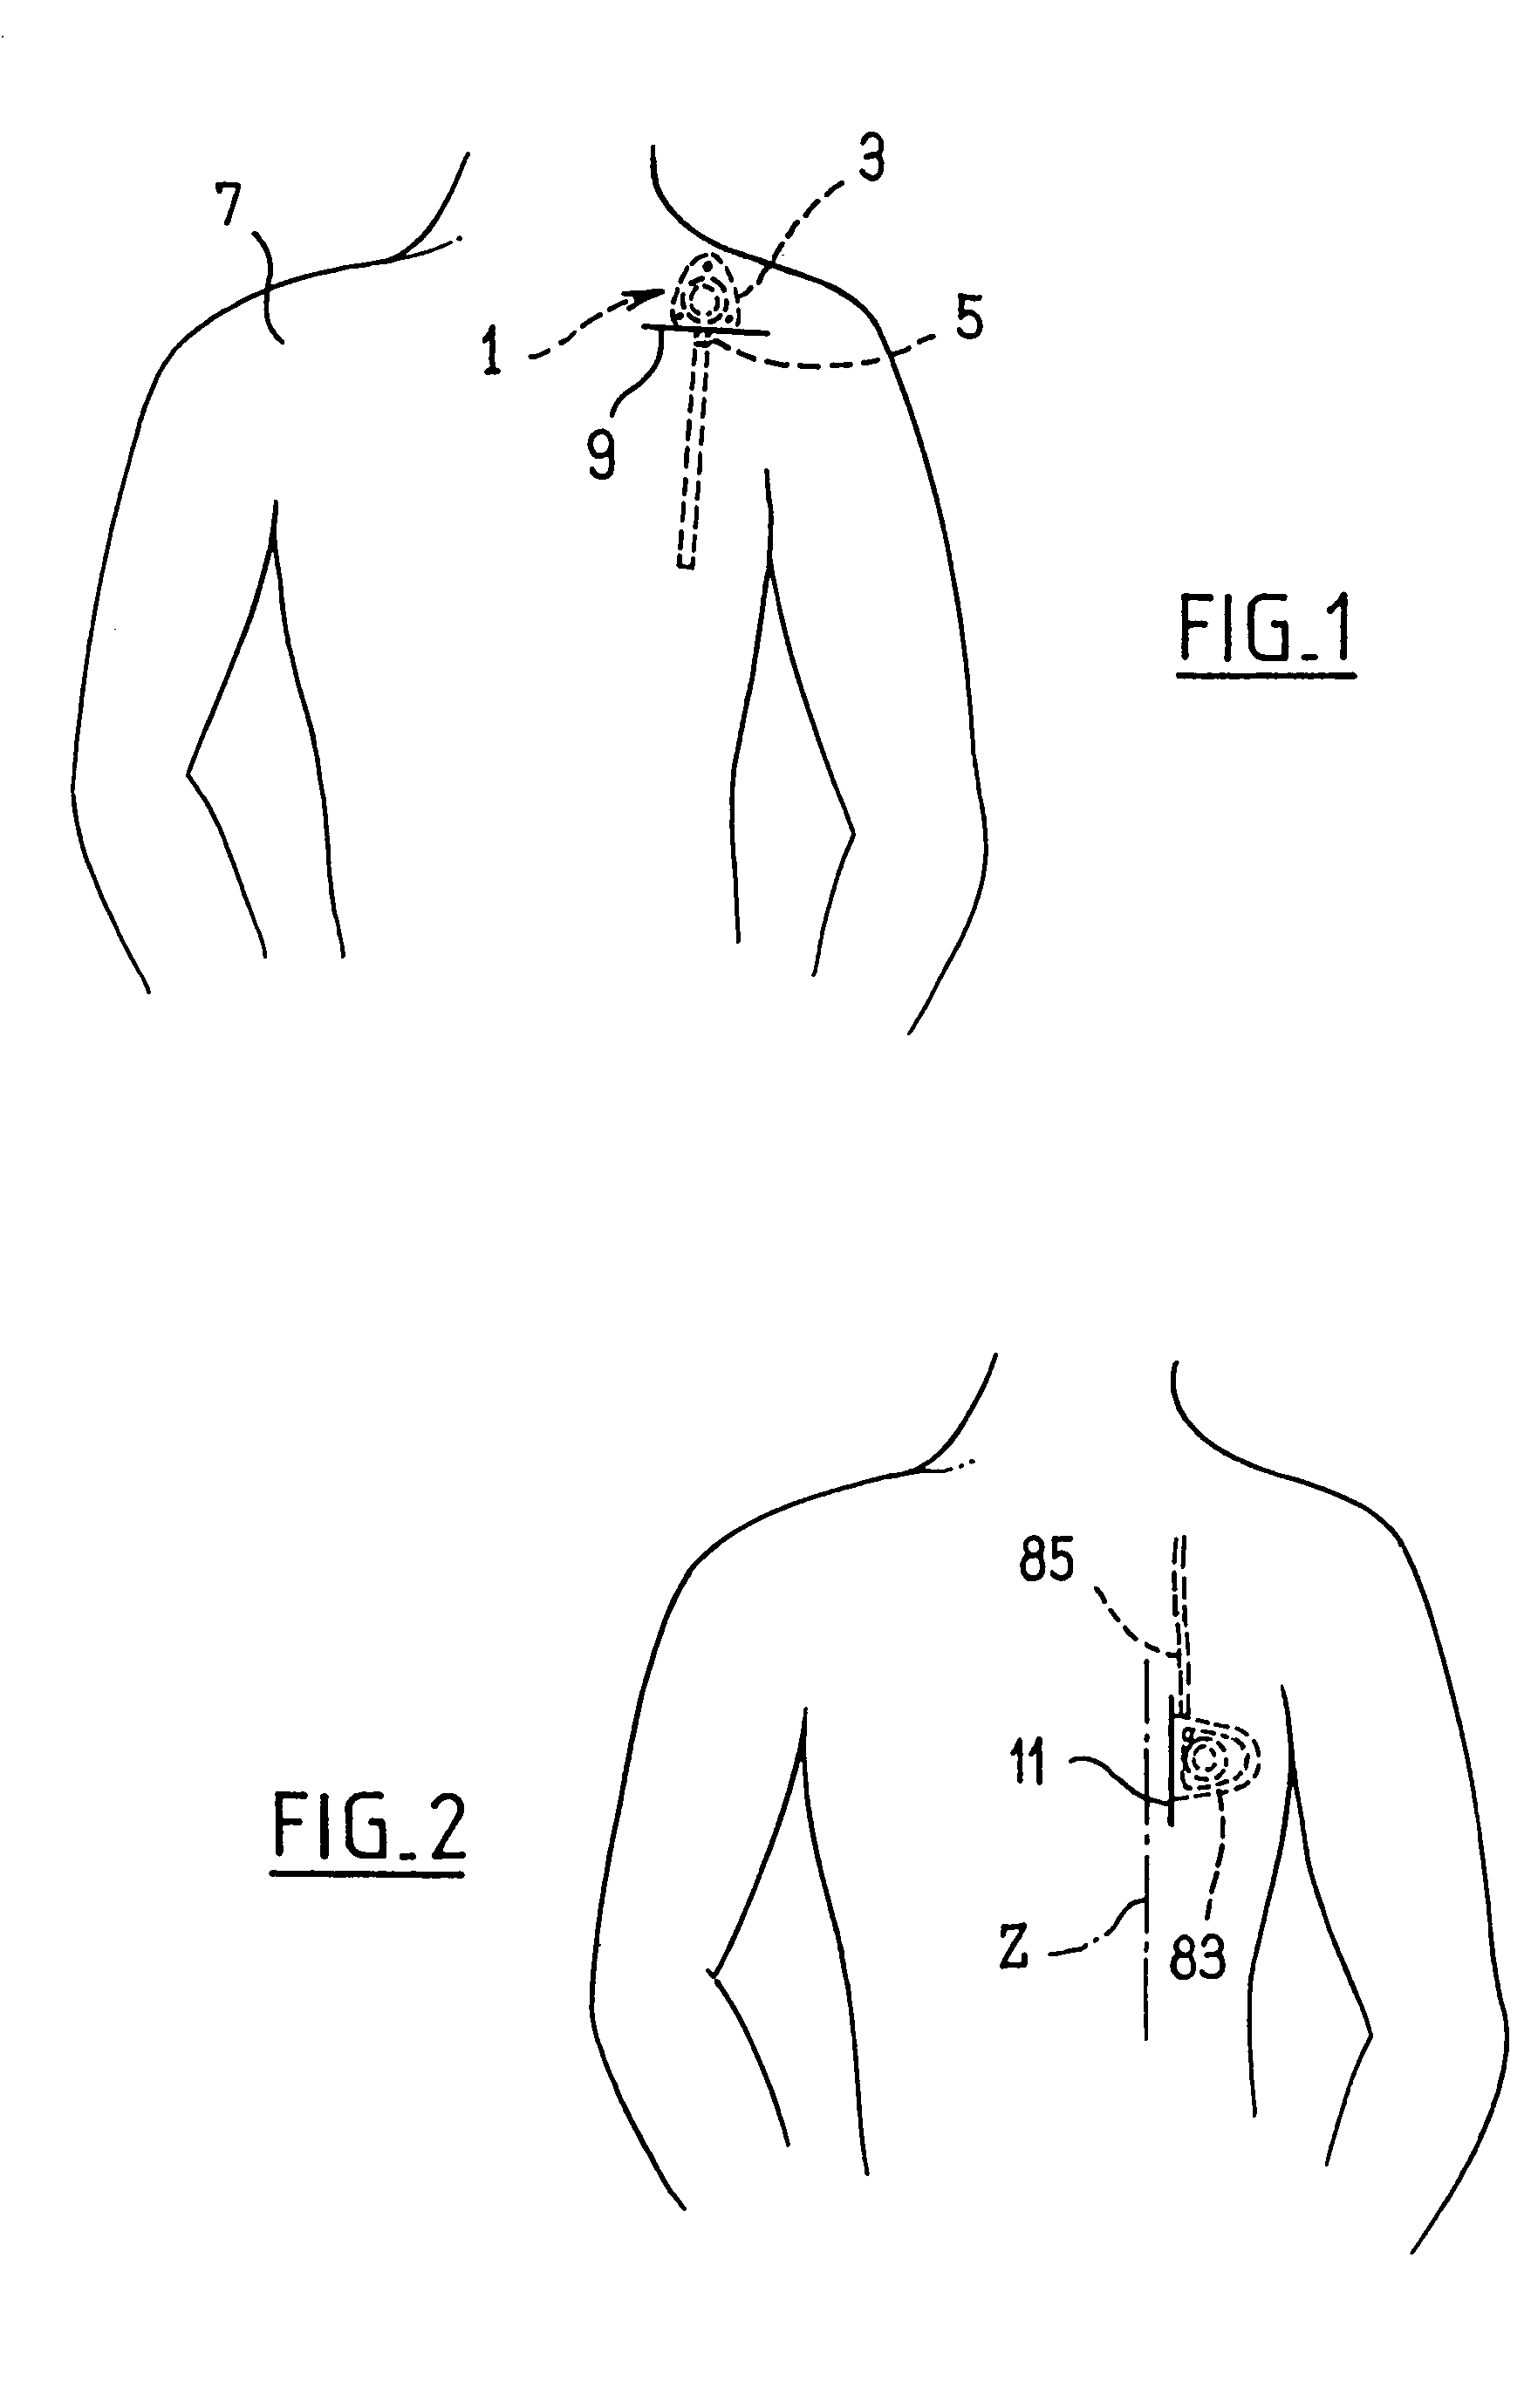 Subcutaneously implantable access port